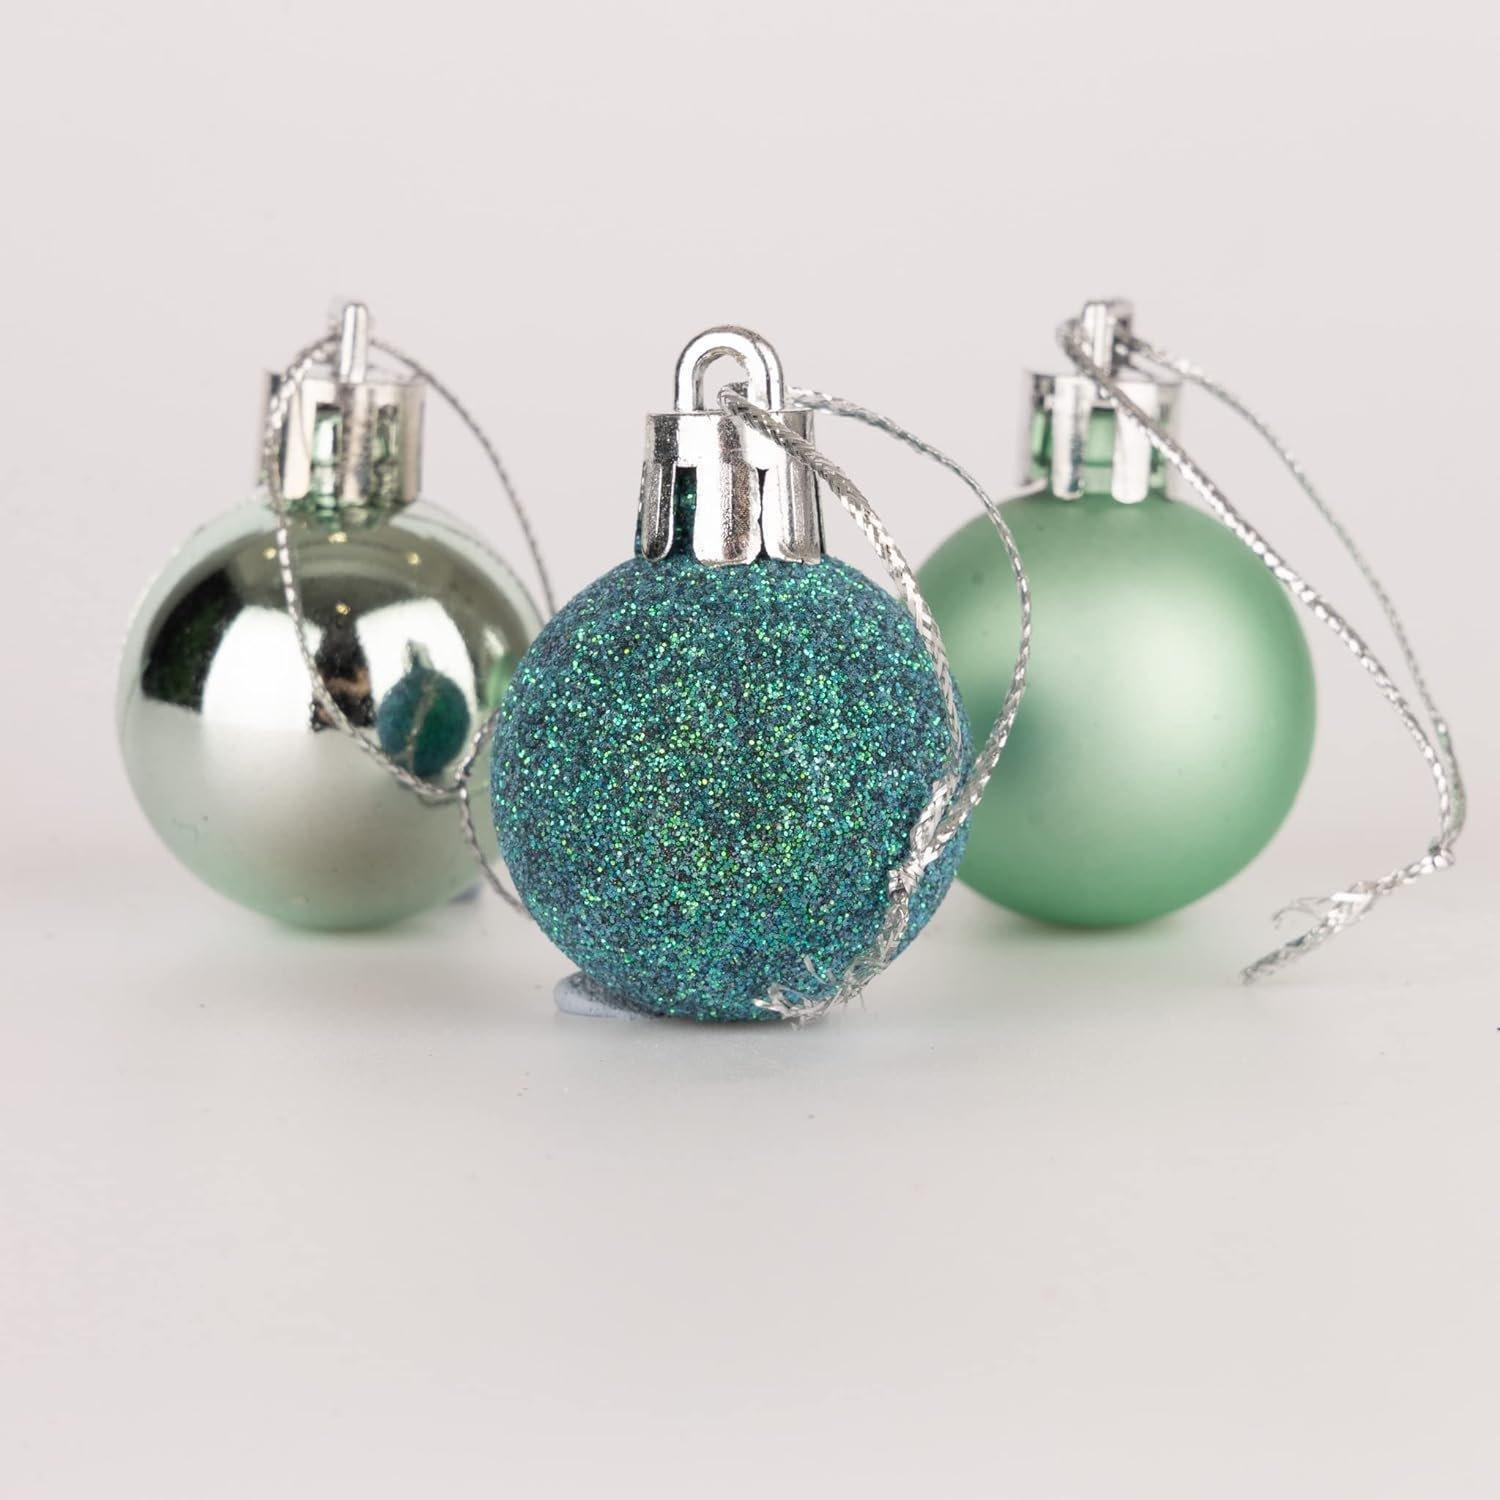 30mm/12Pcs Christmas Baubles Shatterproof Turquoise,Tree Decorations - image 1